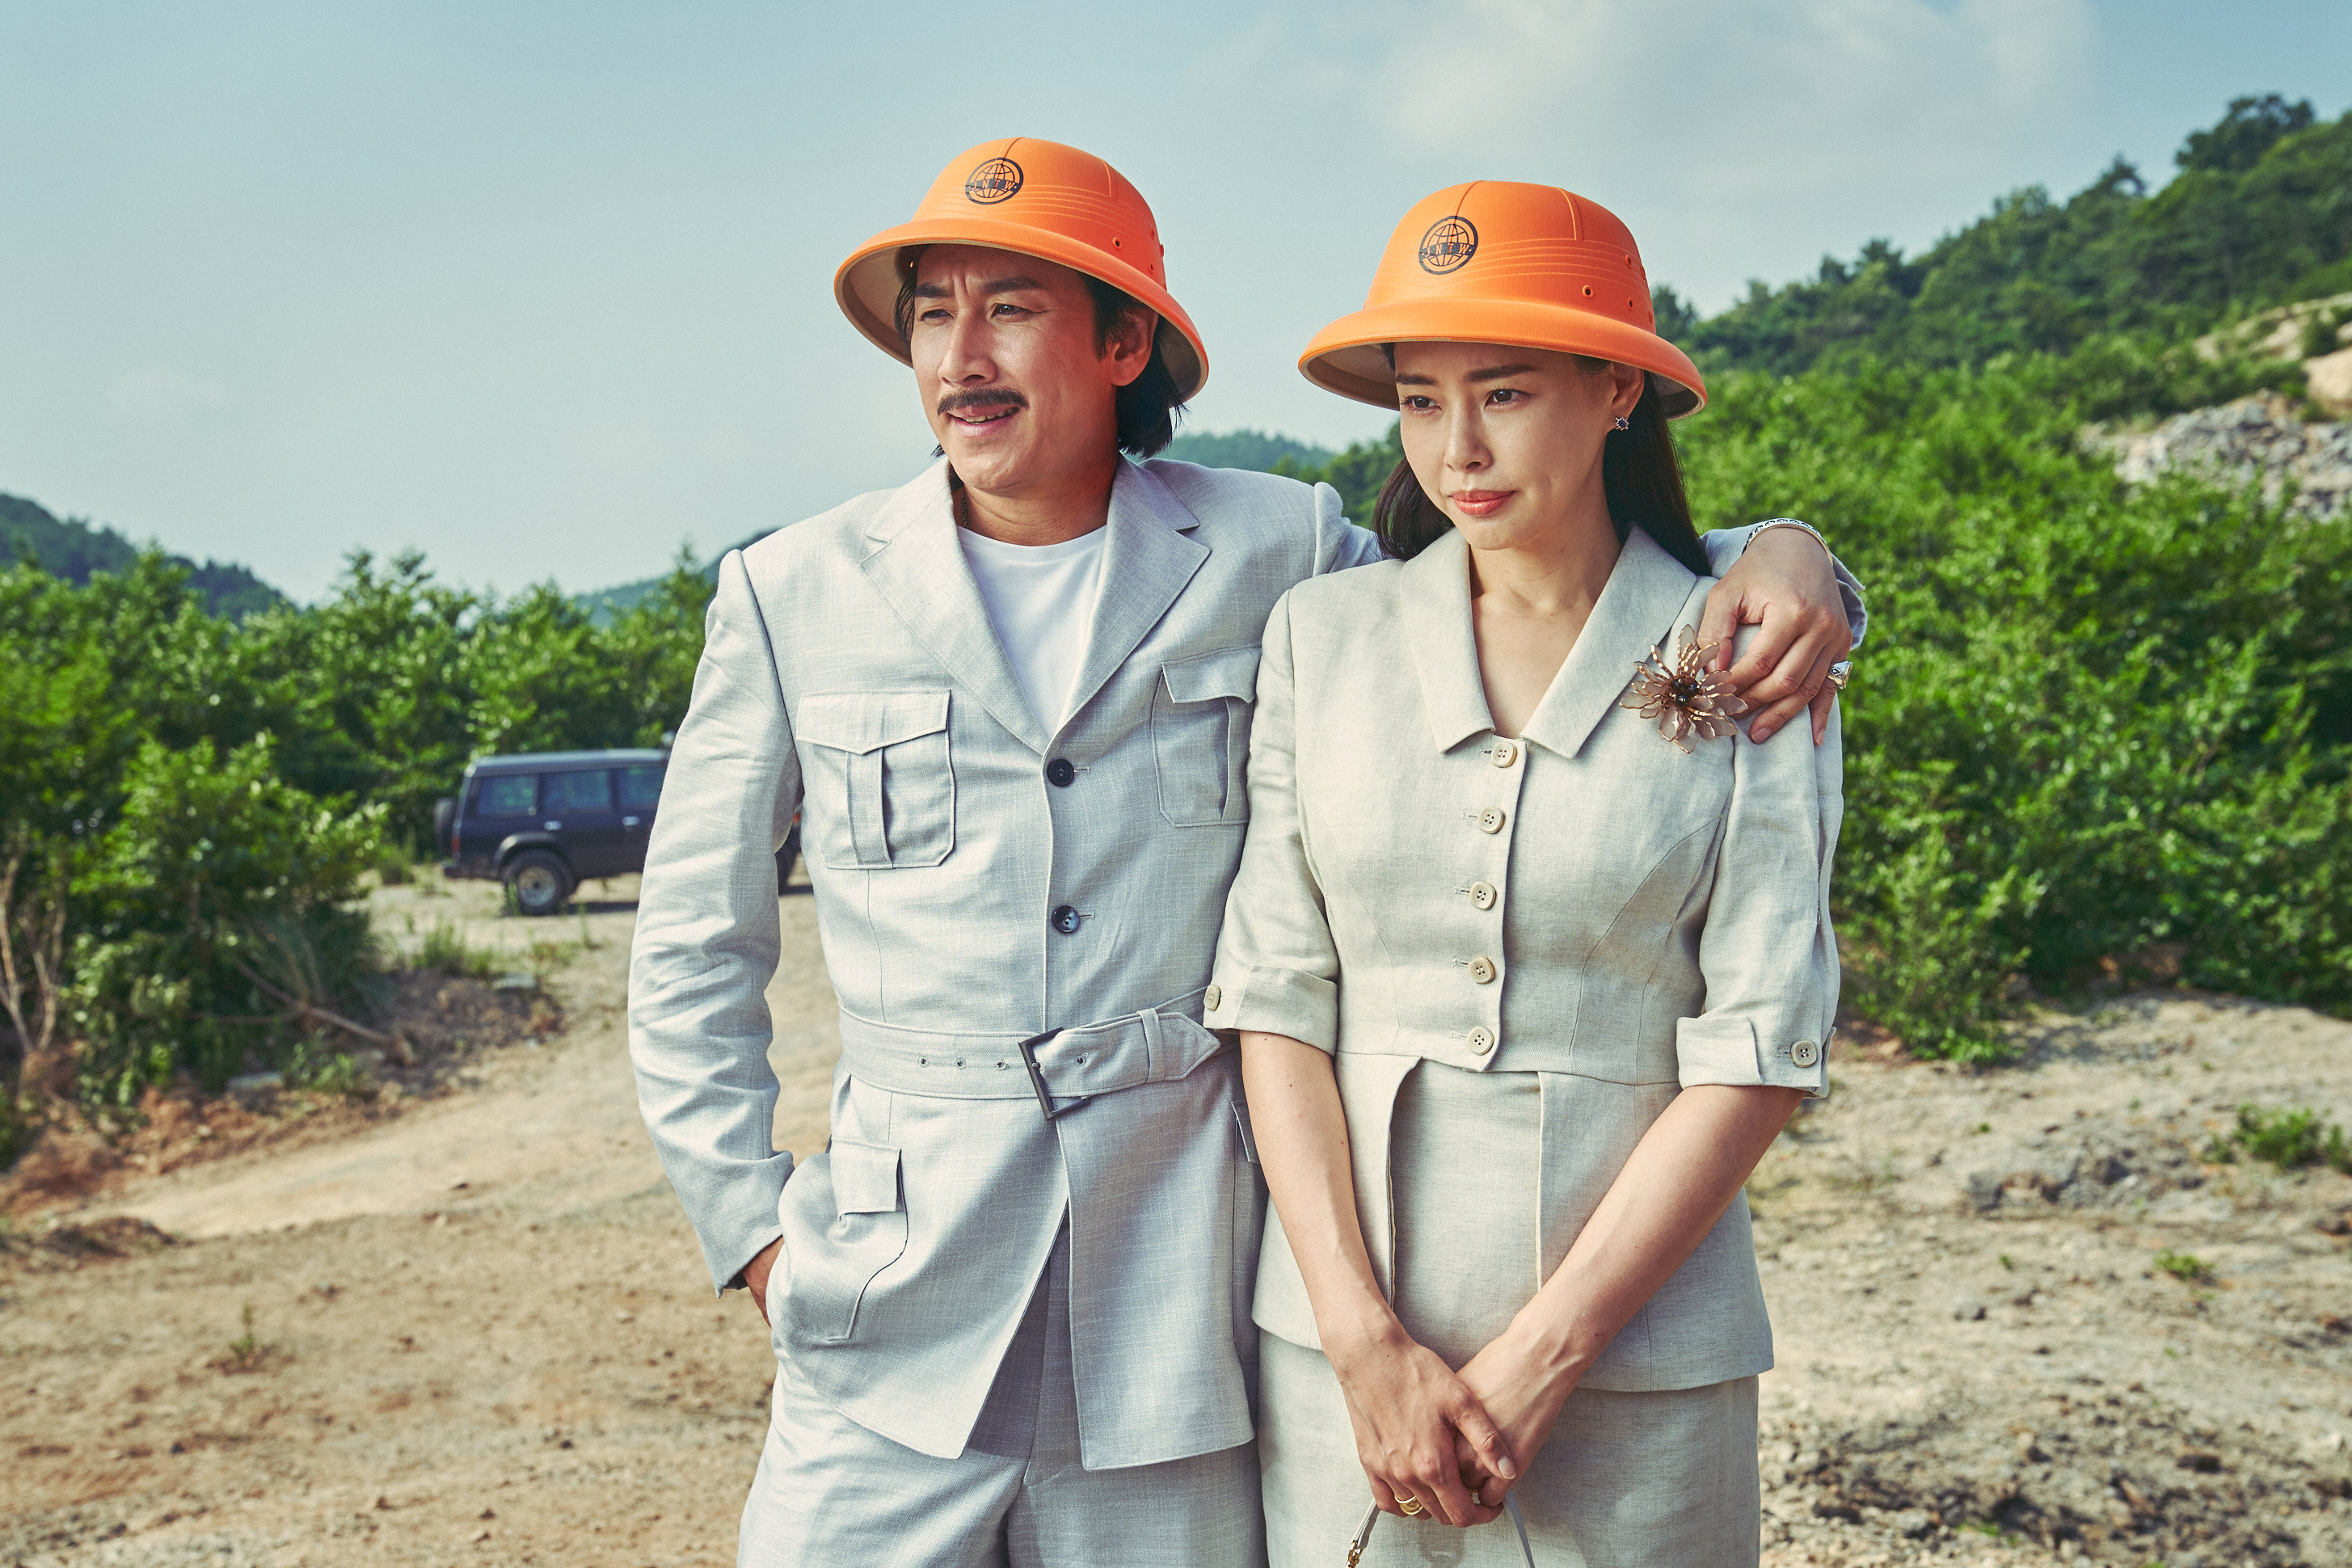 “Parasite”’ actor Lee Sun-kyun (left) stars with Lee Hanee (right) in quirky South Korean musical romcom “Killing Romance”, which has attracted a cult following. 